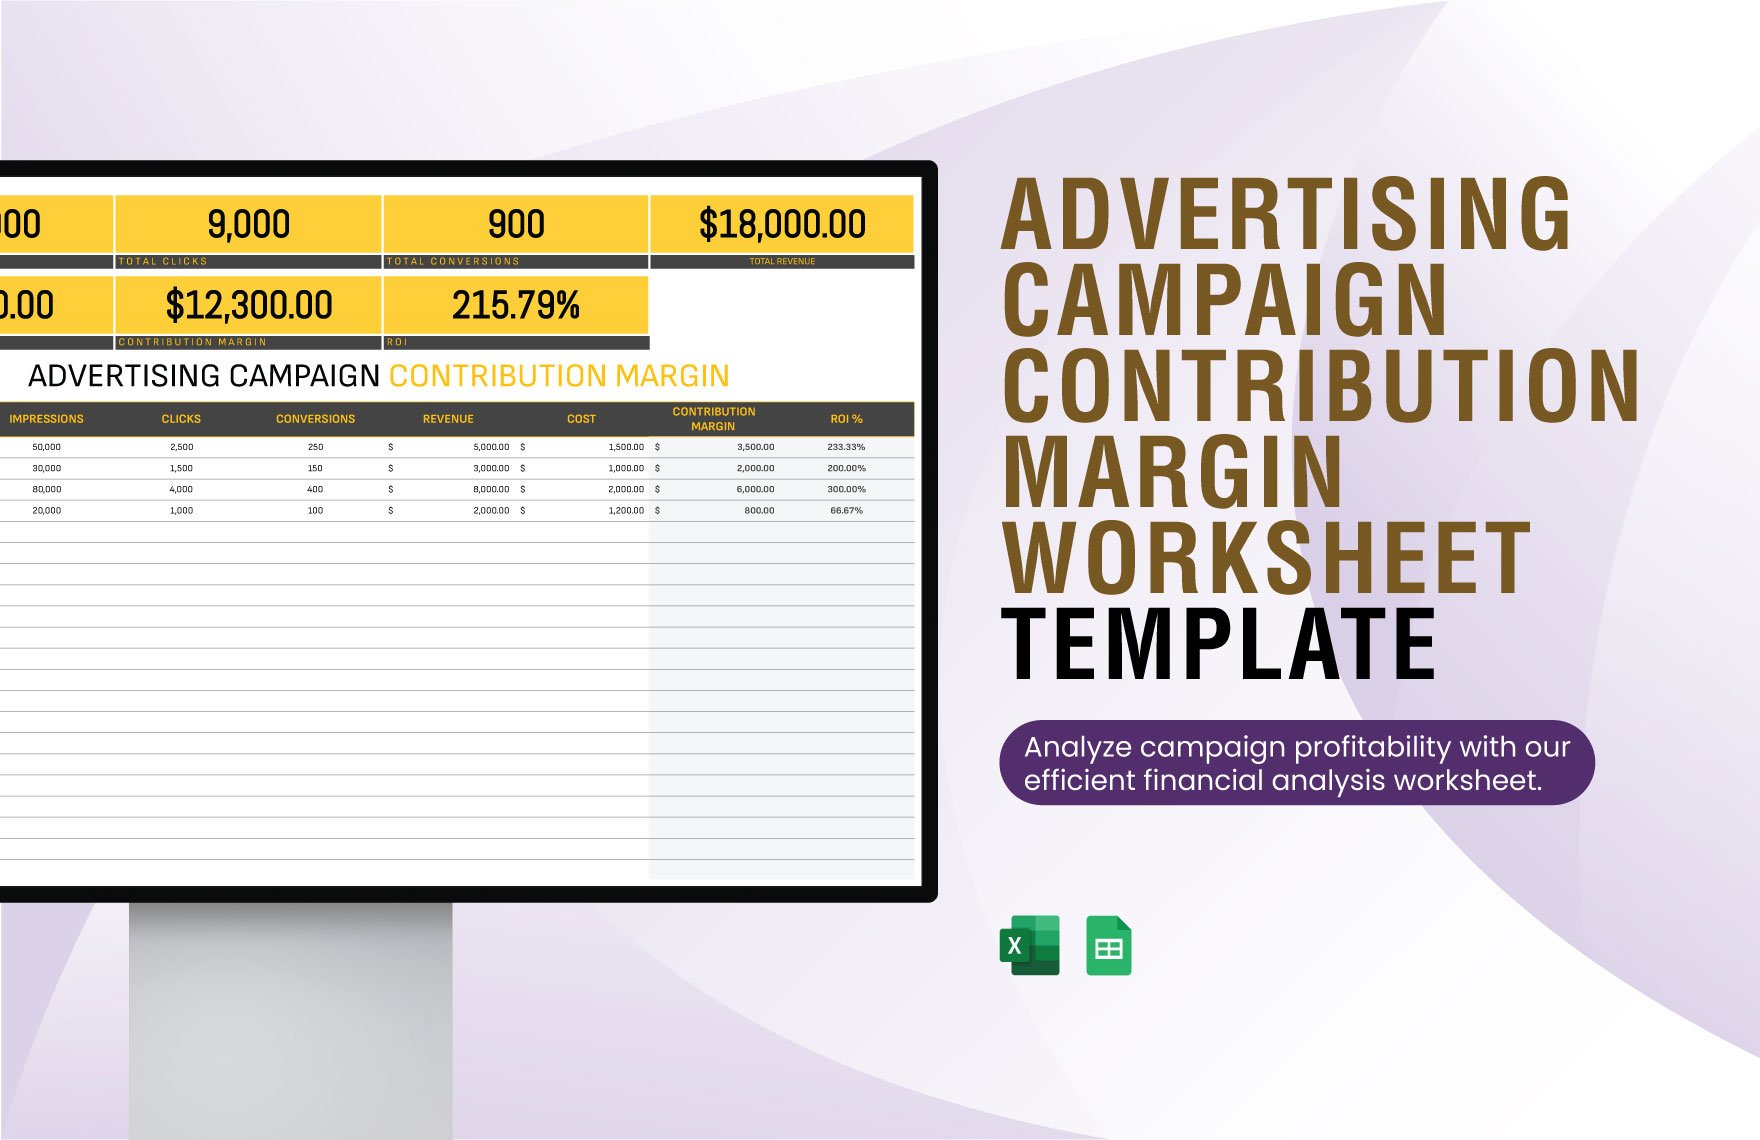 Advertising Campaign Contribution Margin Worksheet Template in Excel, Google Sheets